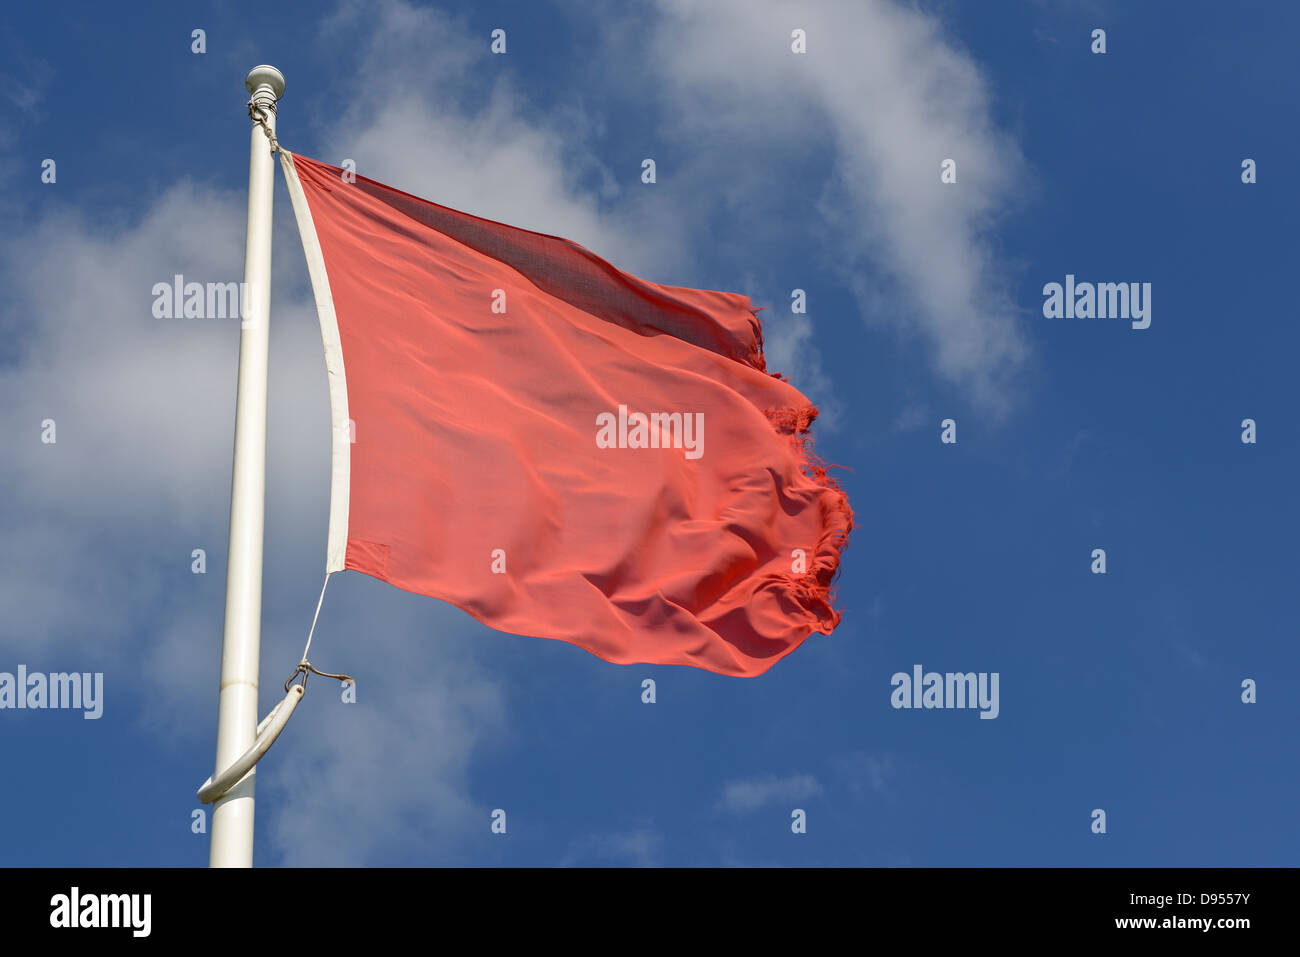 Red flag flying Stock Photo